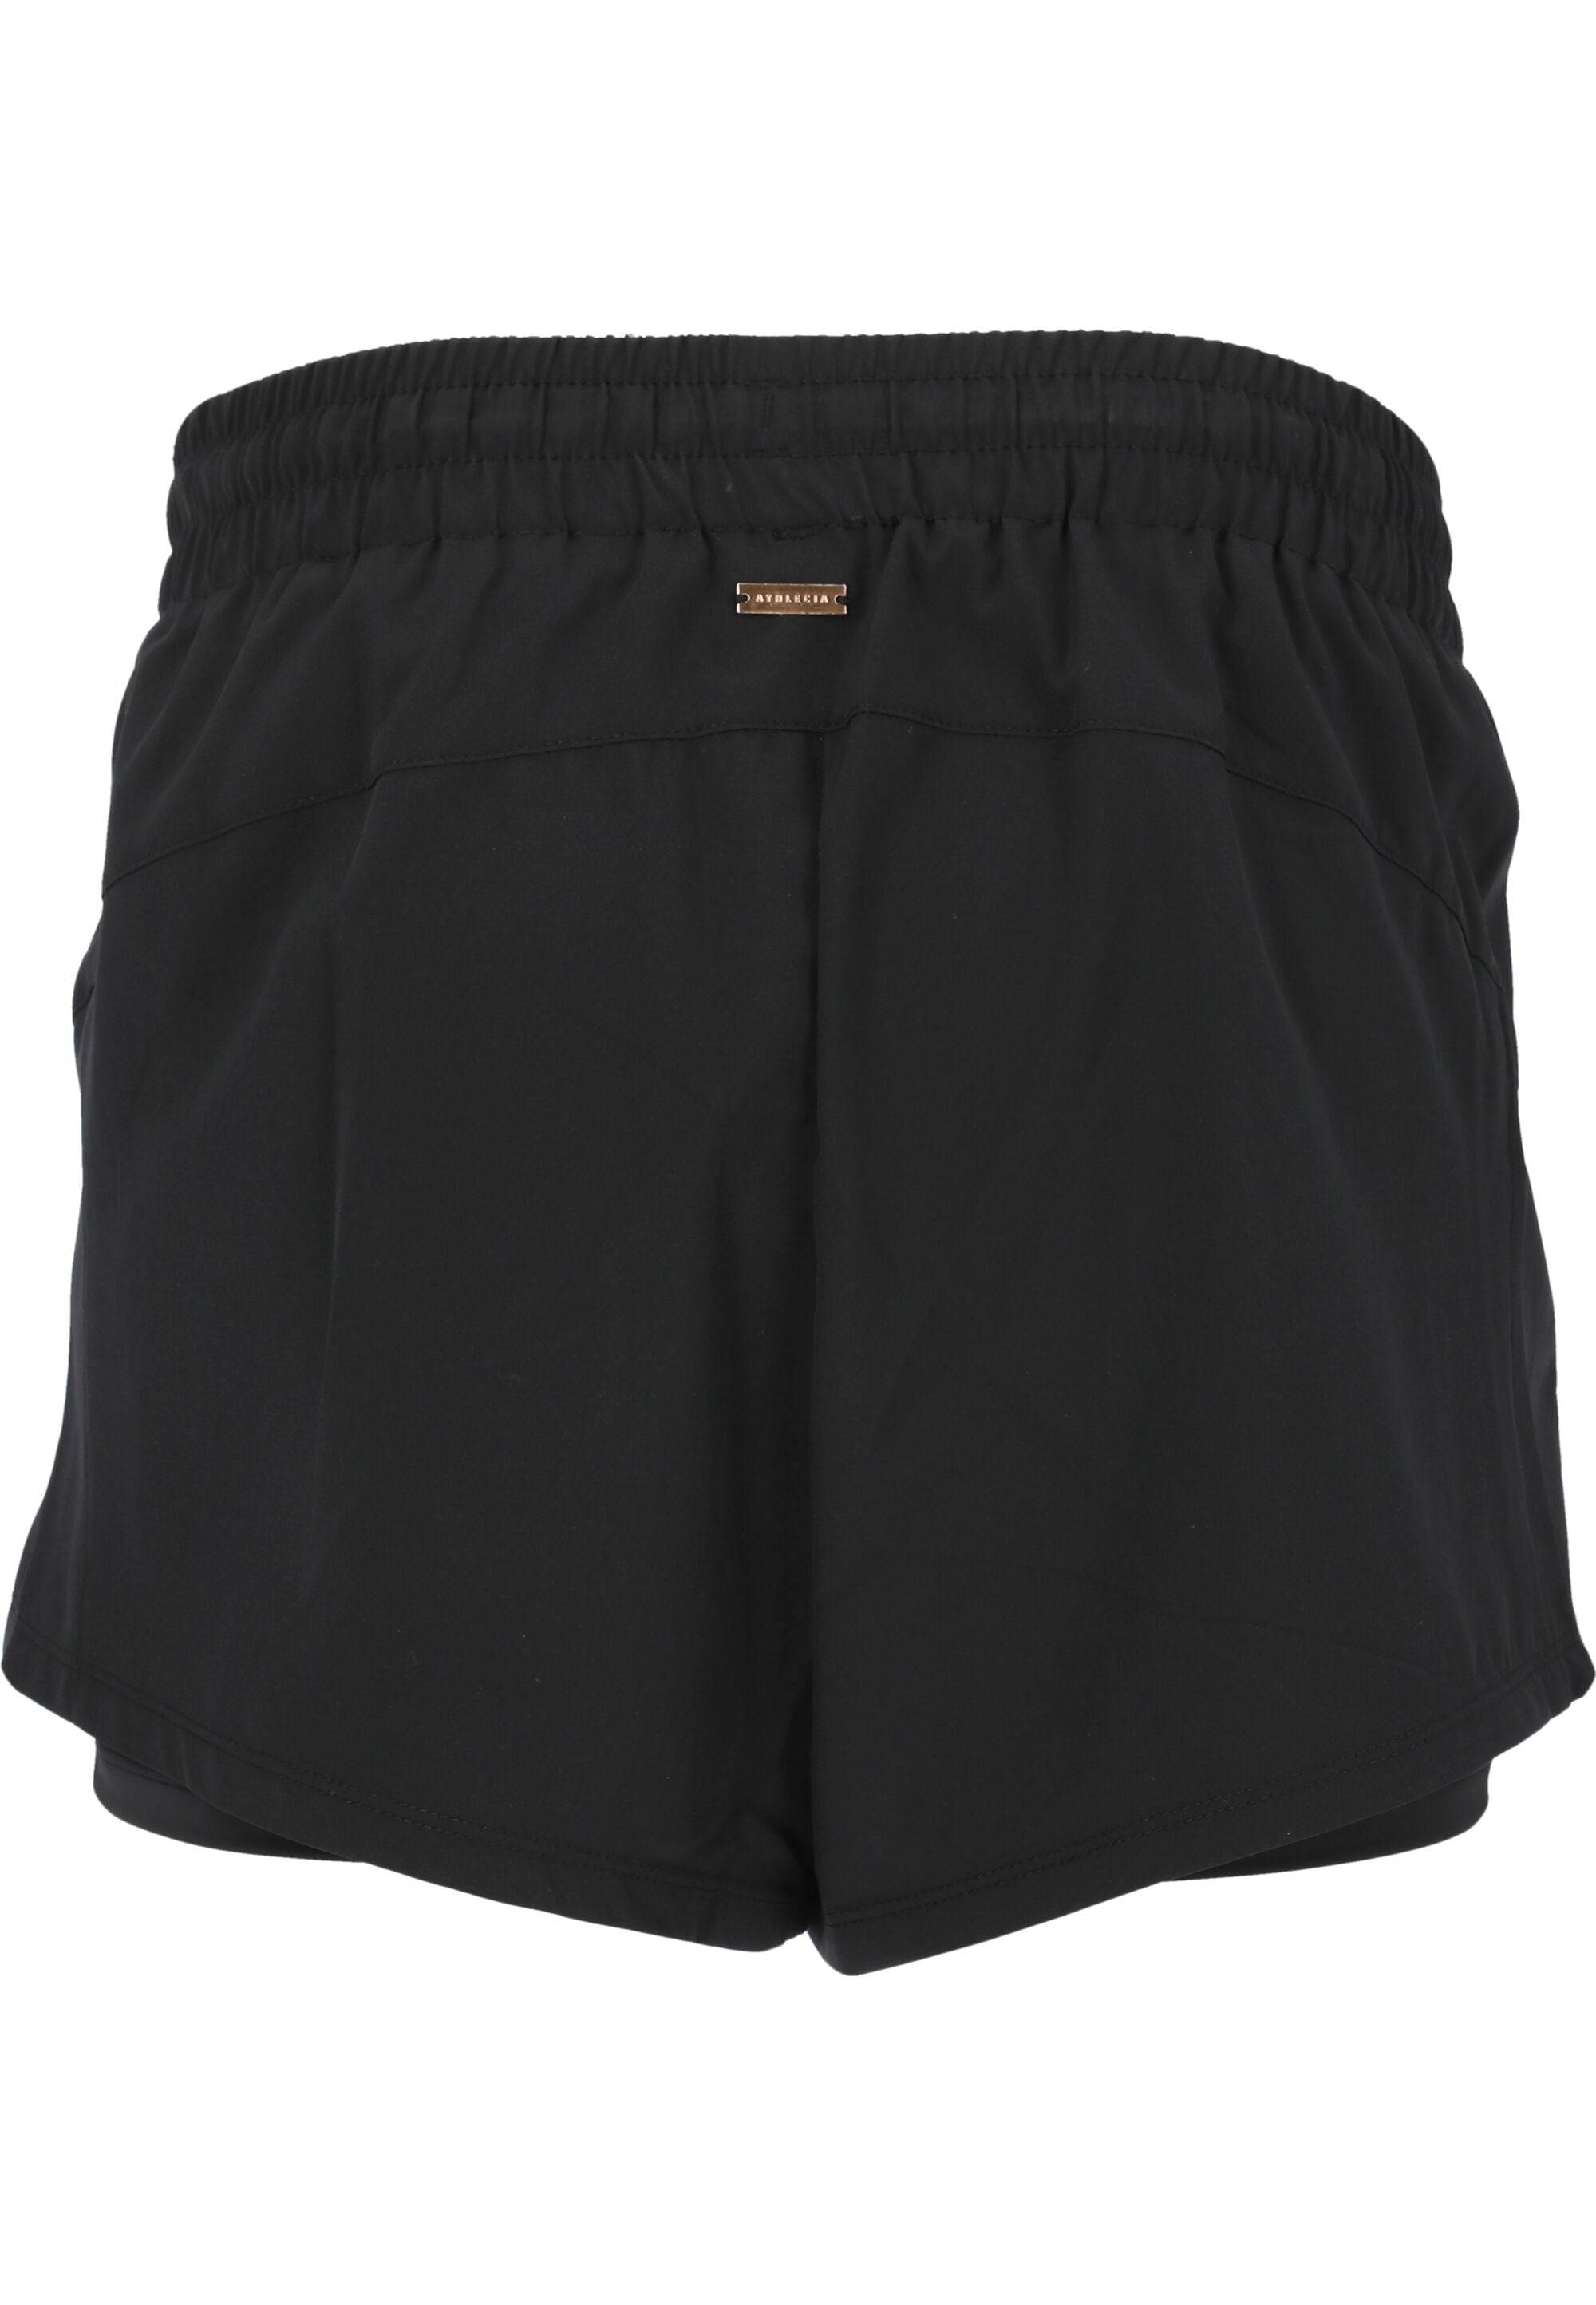 Timmie W 2-in-1 Shorts